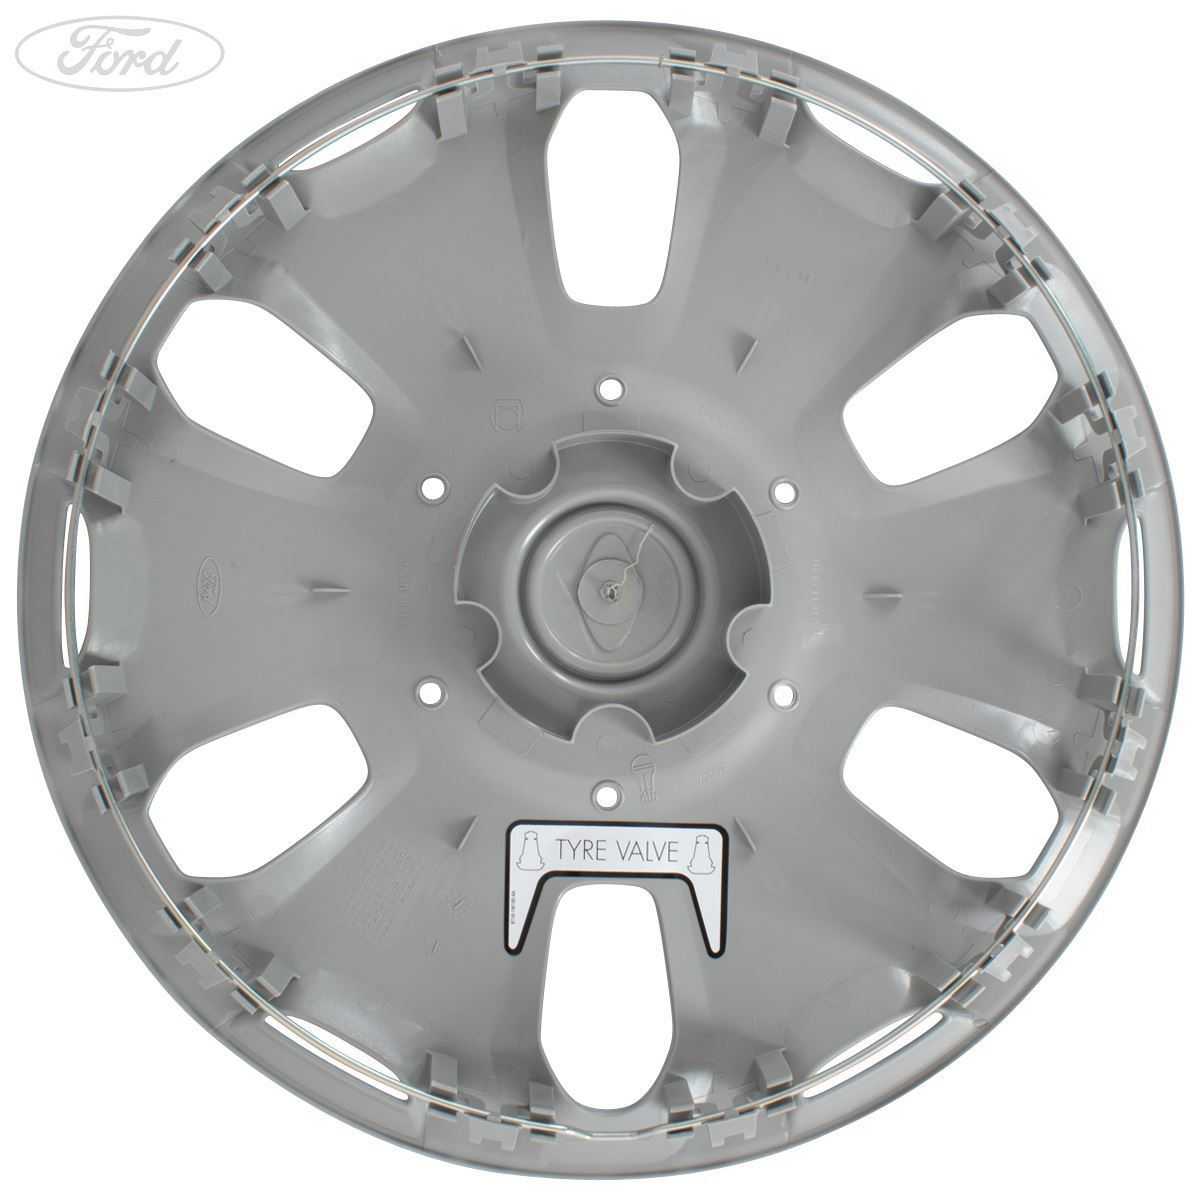 Ford, TRANSIT CONNECT 15" WHEEL TRIM SILVER SINGLE 2009-